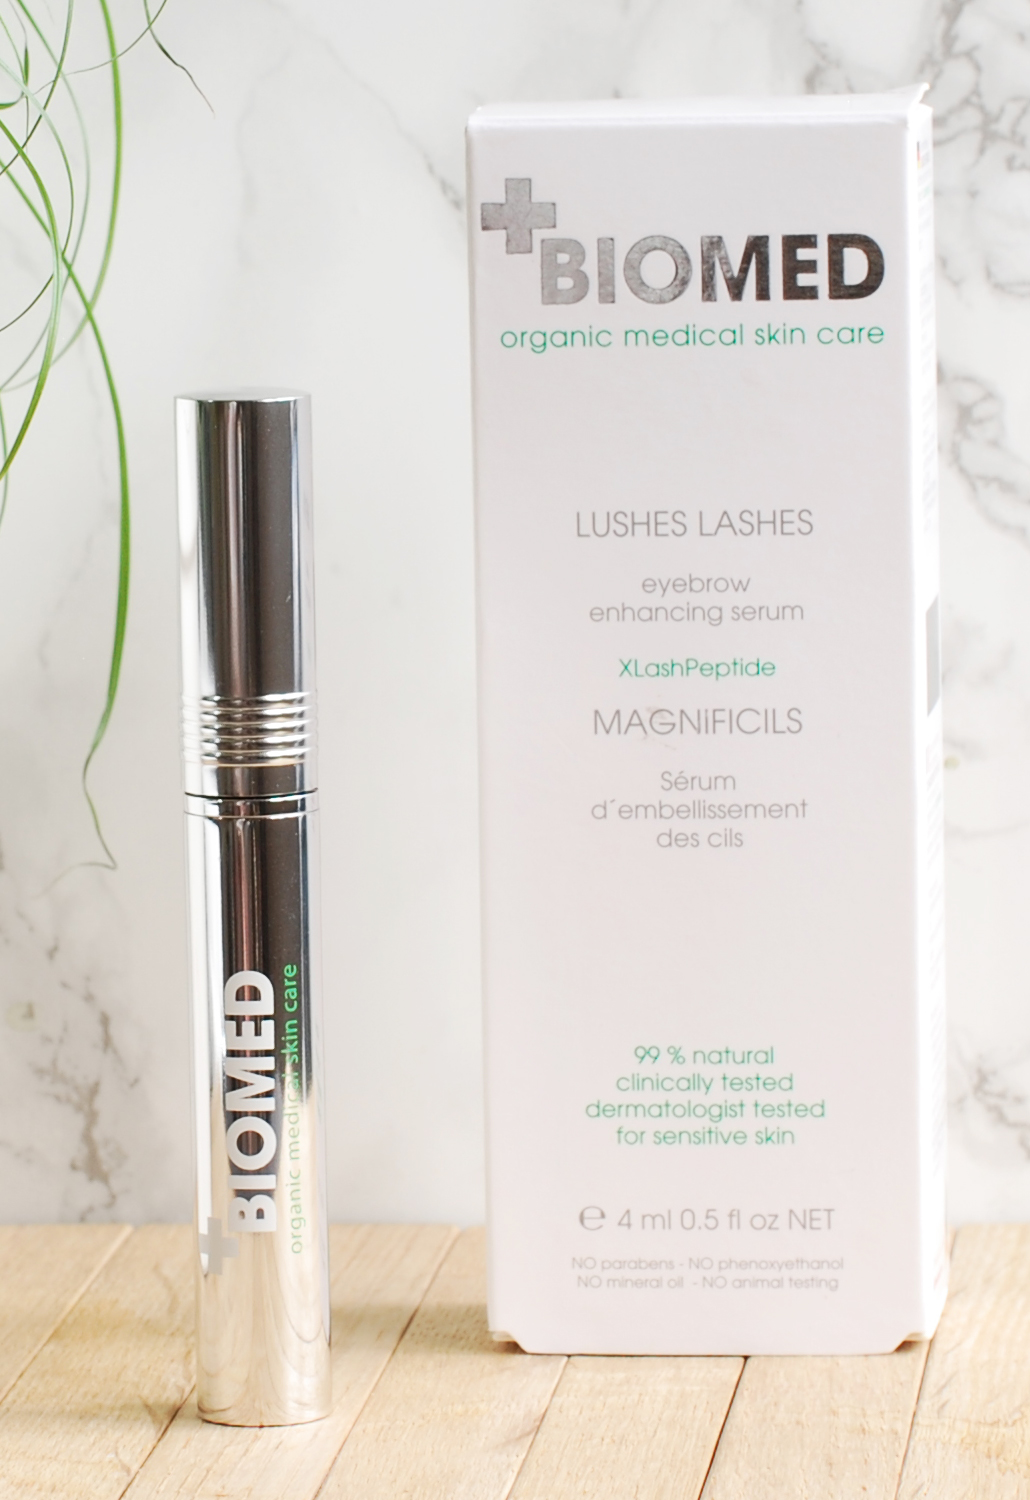 biomed organic medical skin care review body lushes lashes 